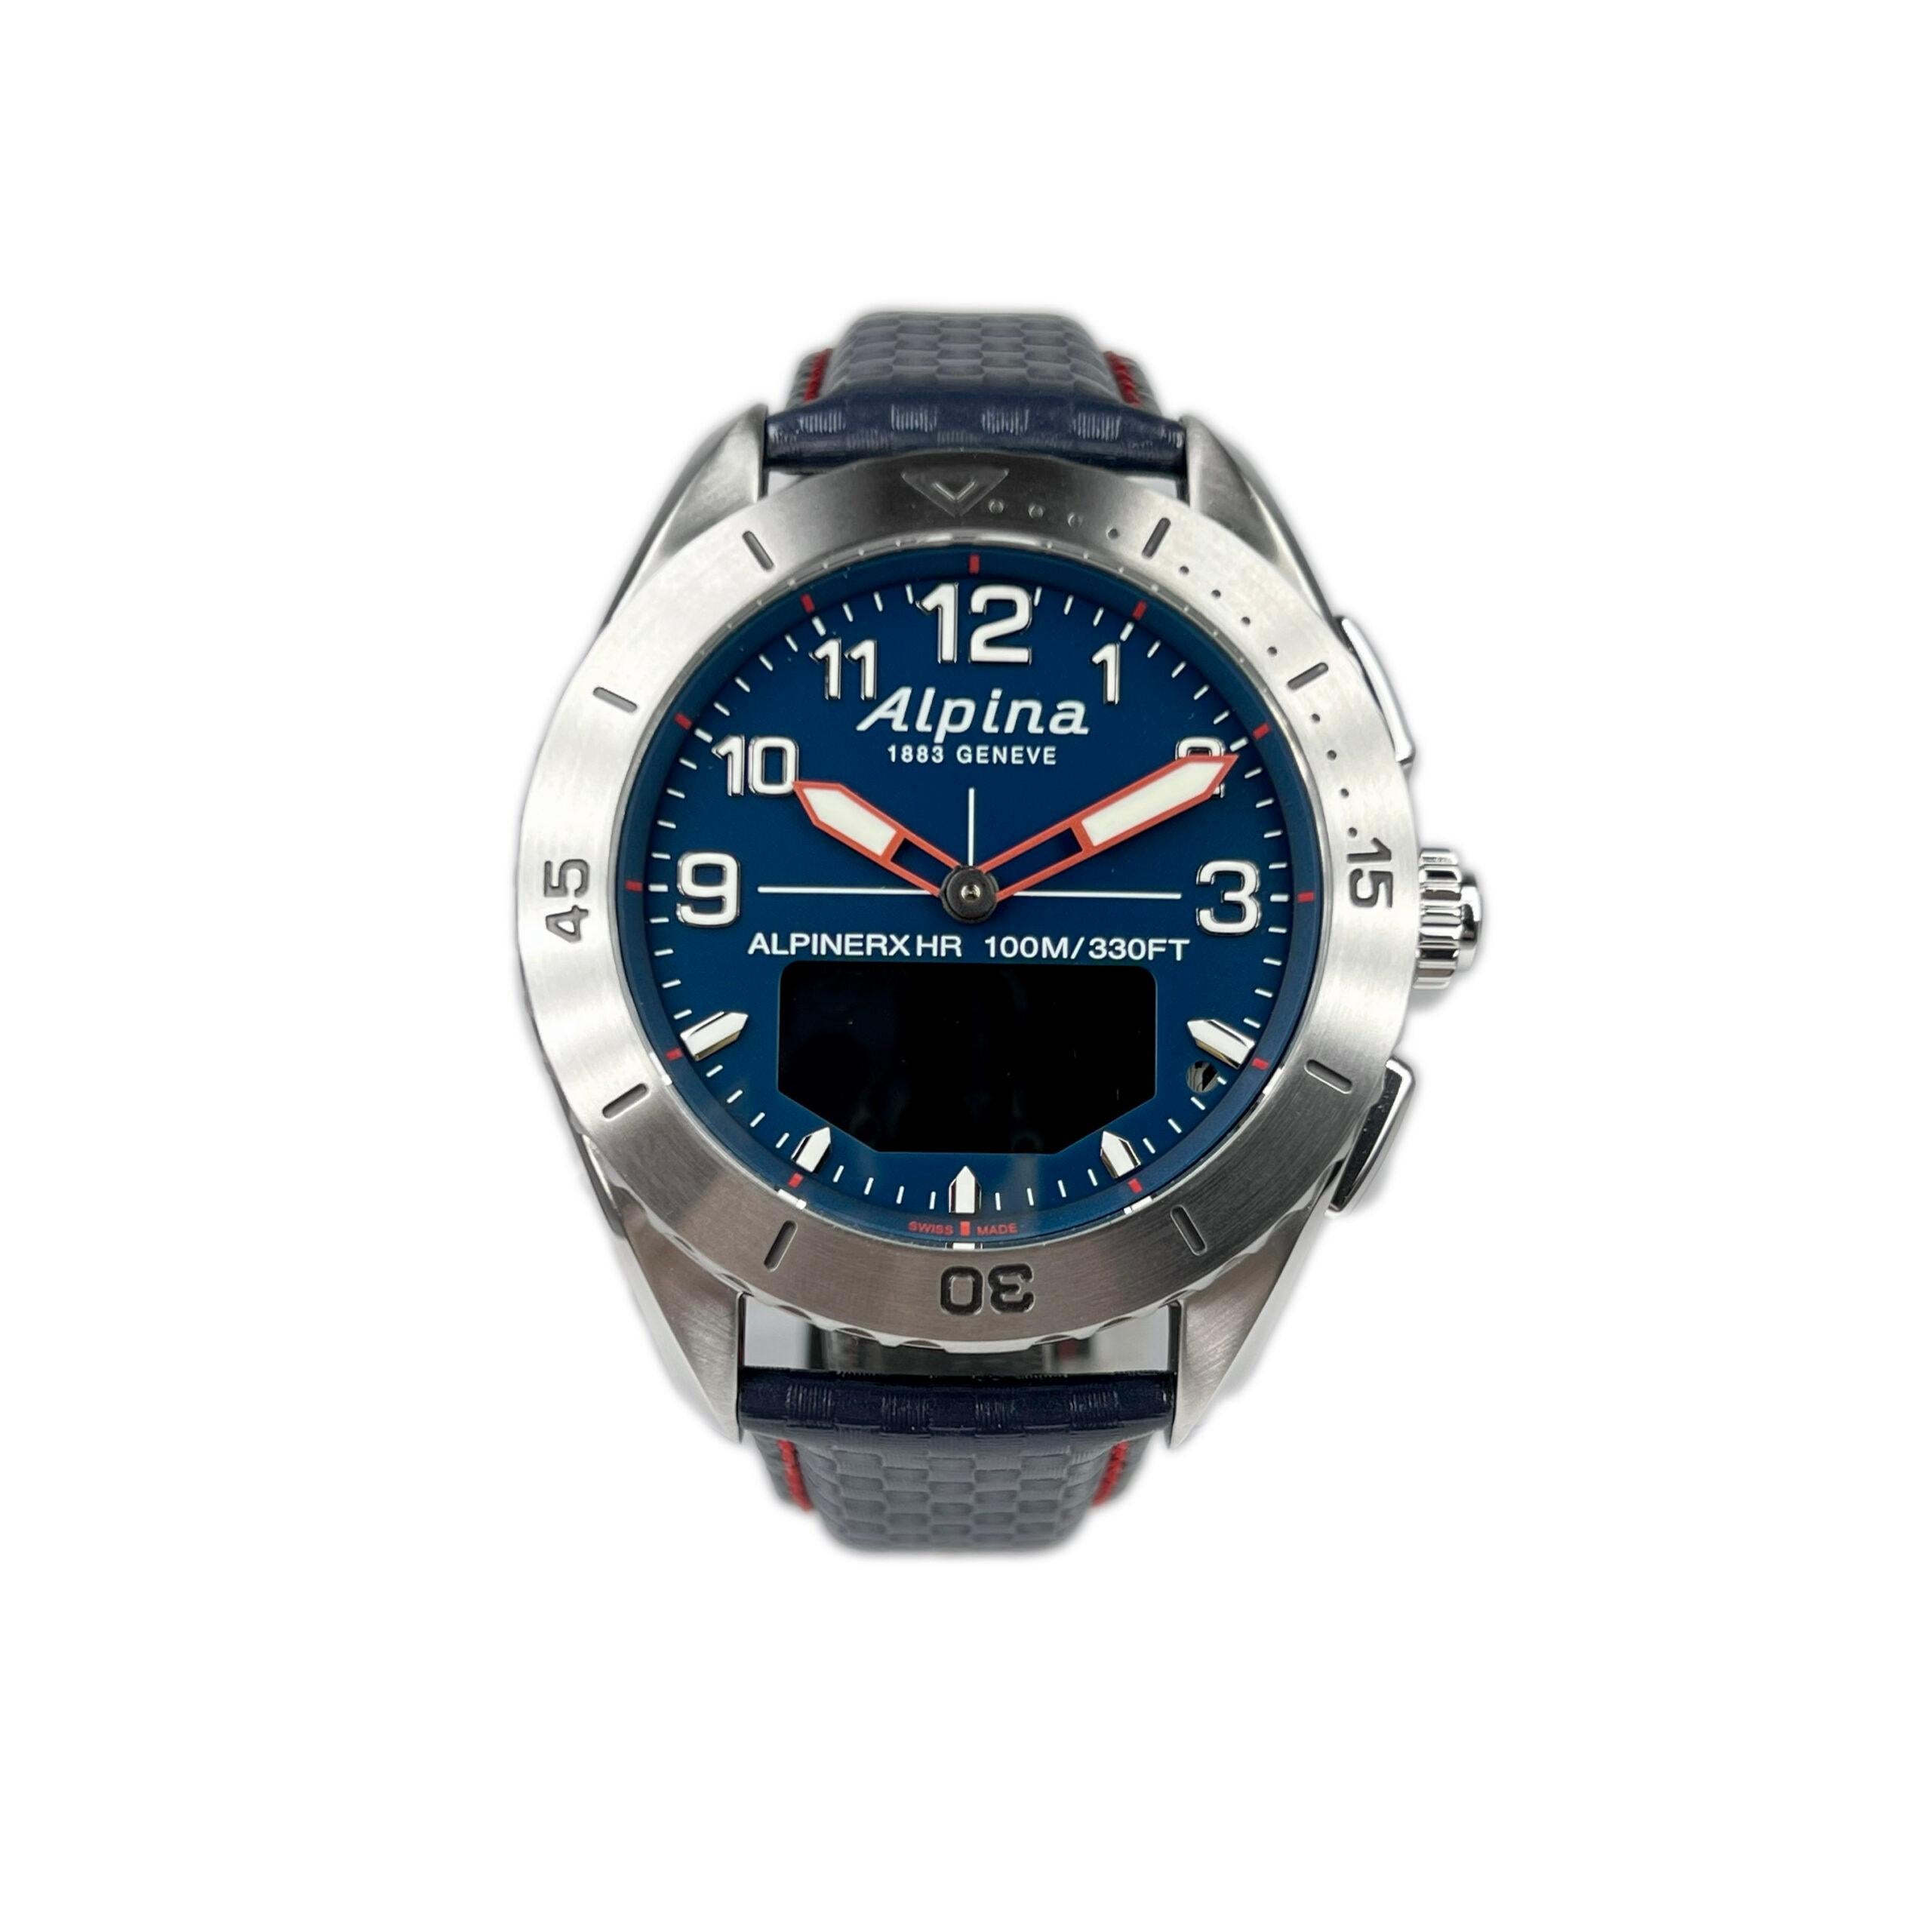 This Men’s Watch features a blue dial with mat finishing and silver color indices that have been coated with a white luminous treatment. Blue inner ring with blue markers. Red hands with white luminous treatment. Amoled touch screen. The case